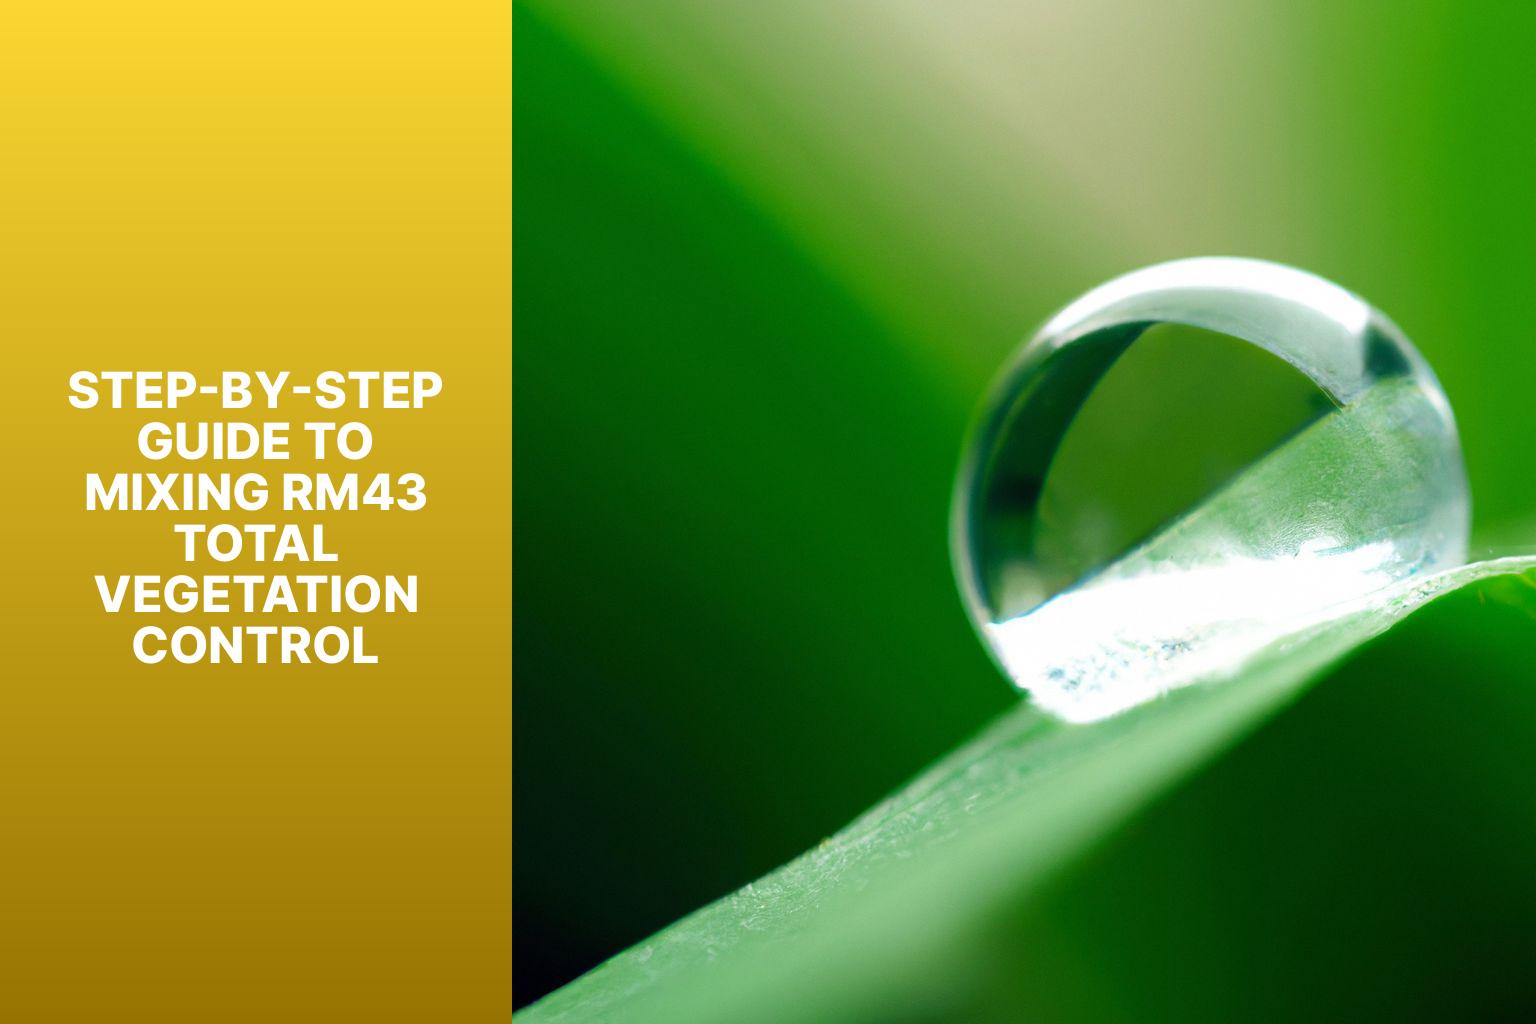 Step-by-Step Guide to Mixing RM43 Total Vegetation Control - How To Mix Rm43 Total Vegetation Control? 